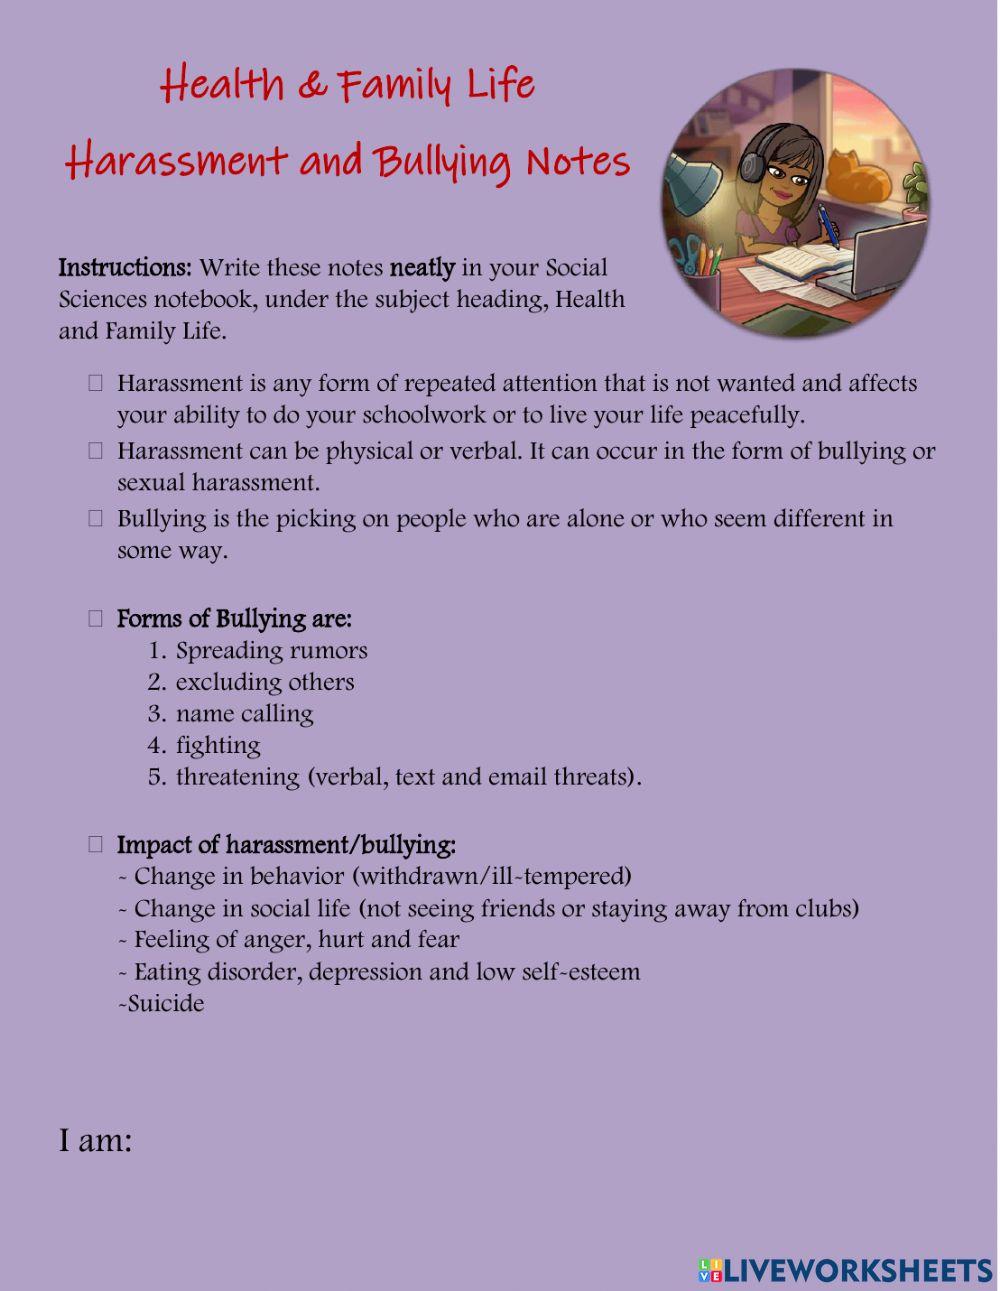 Harassment & Bullying Notes